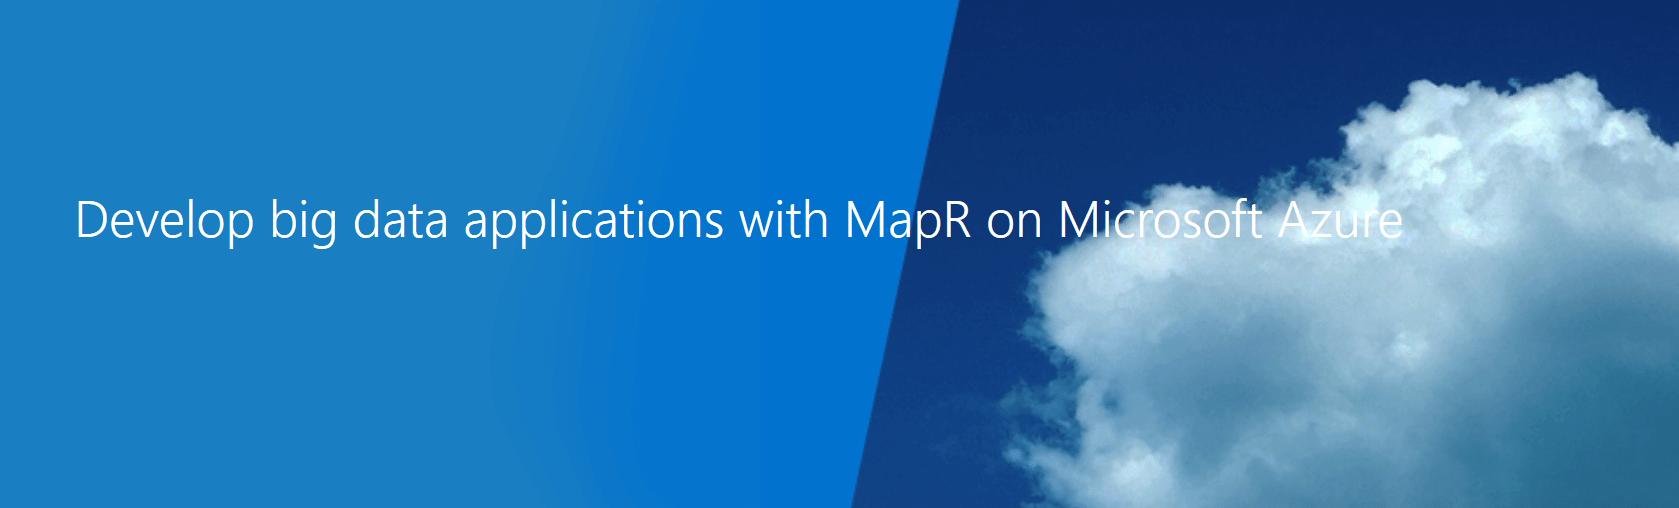 Develop big data applications with MapR on Azure